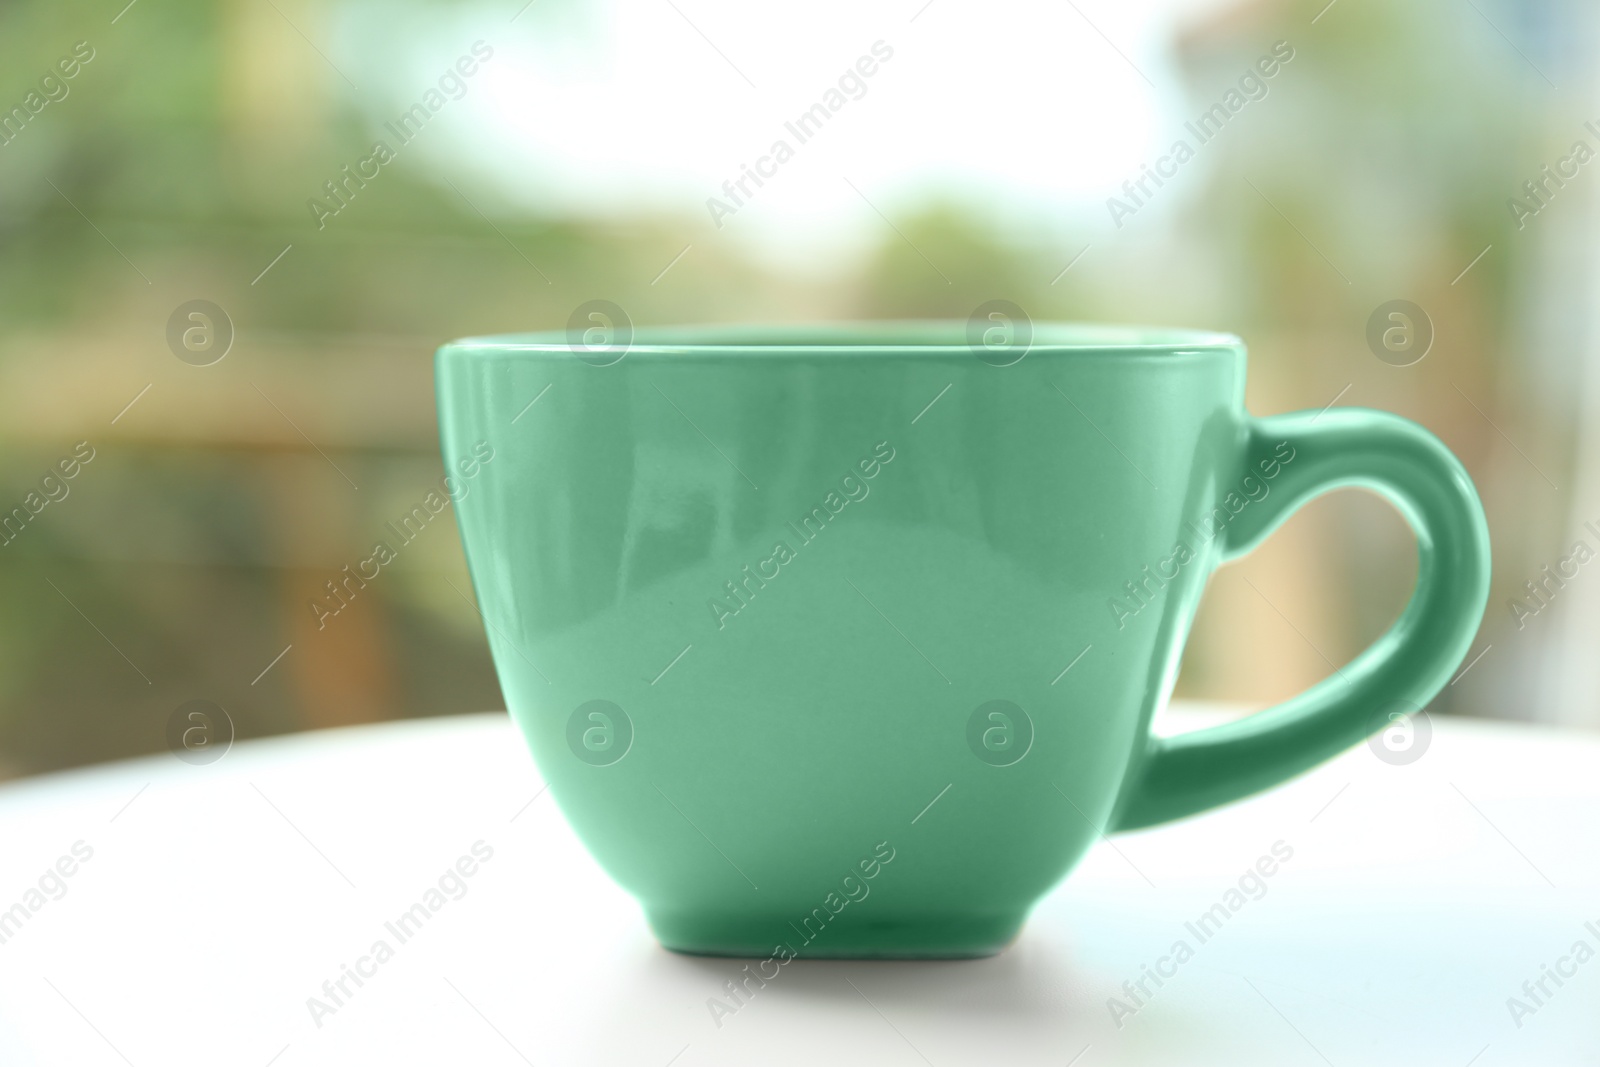 Photo of Mint green cup on table against blurred background